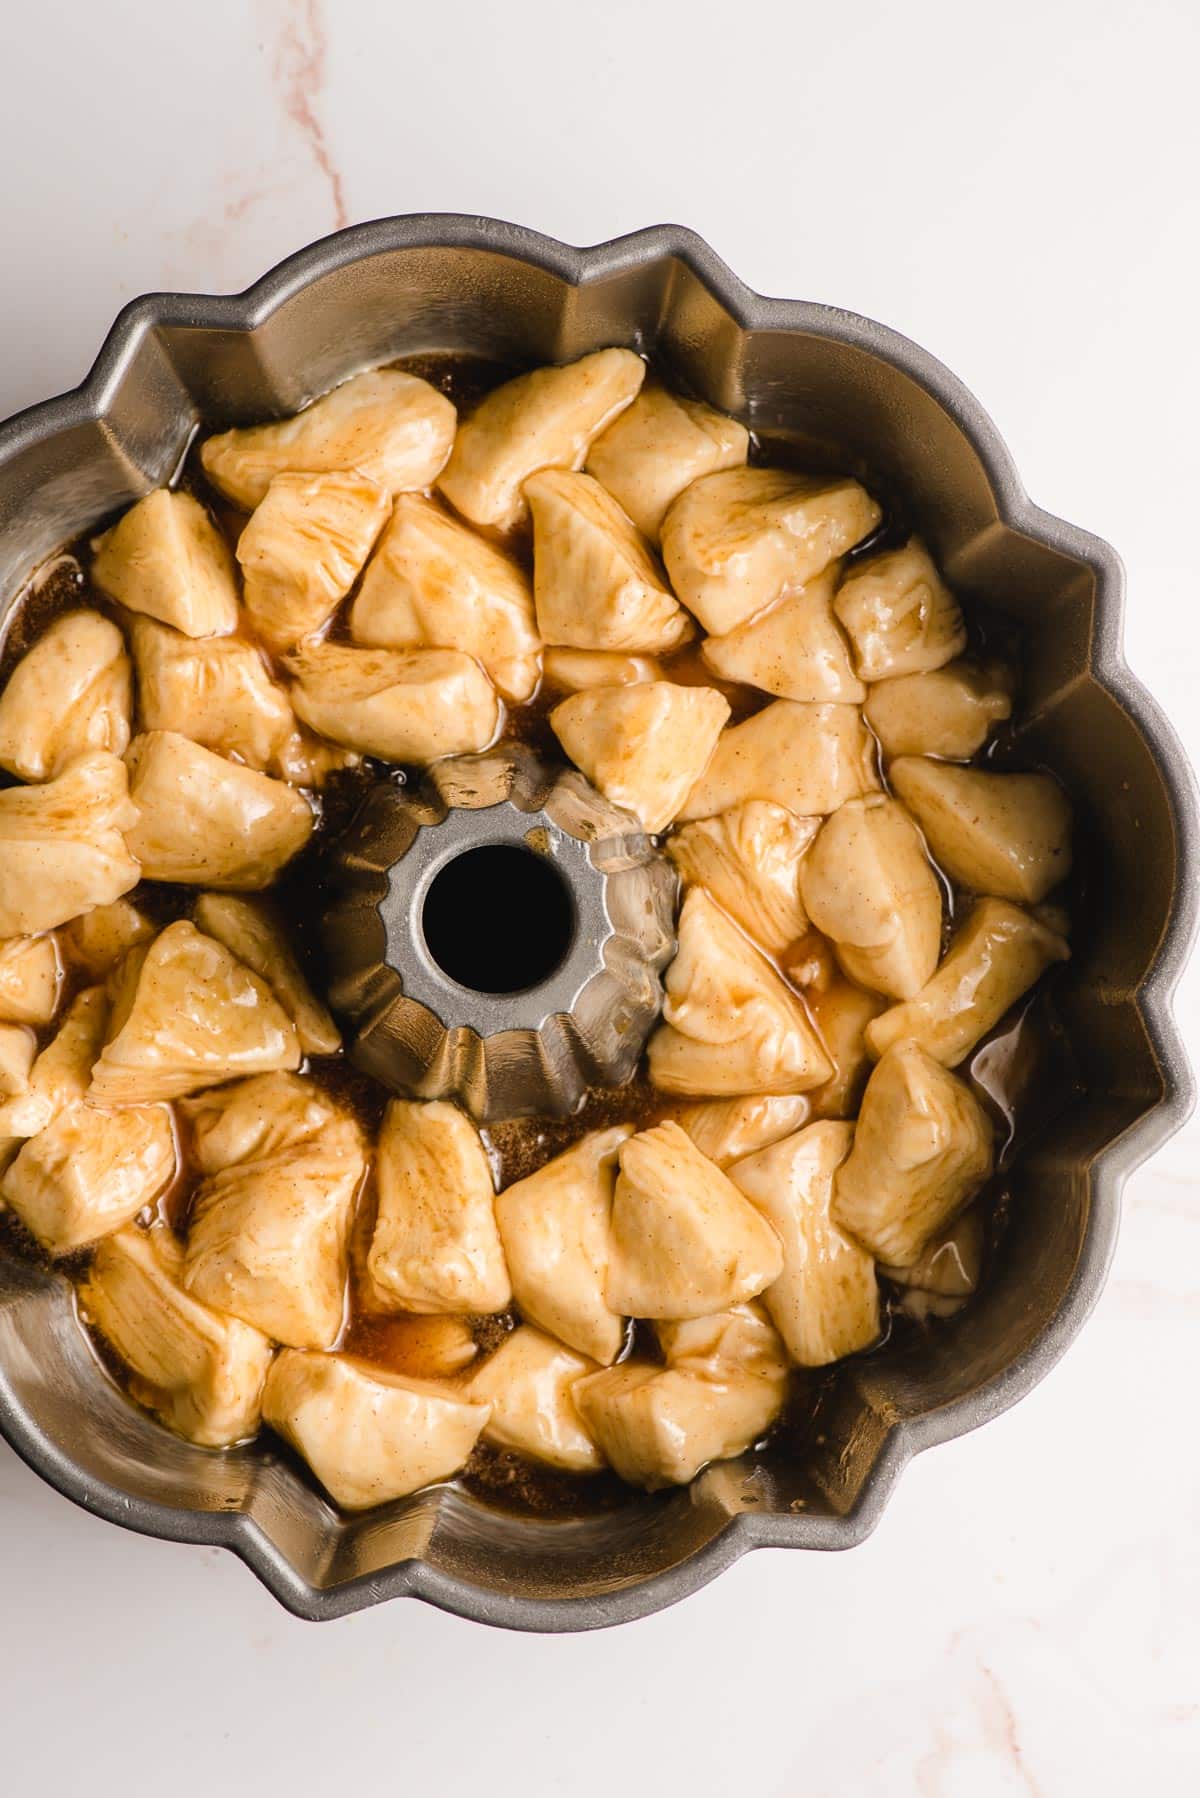 Unbaked monkey bread with canned biscuits shown in a bundt pan.